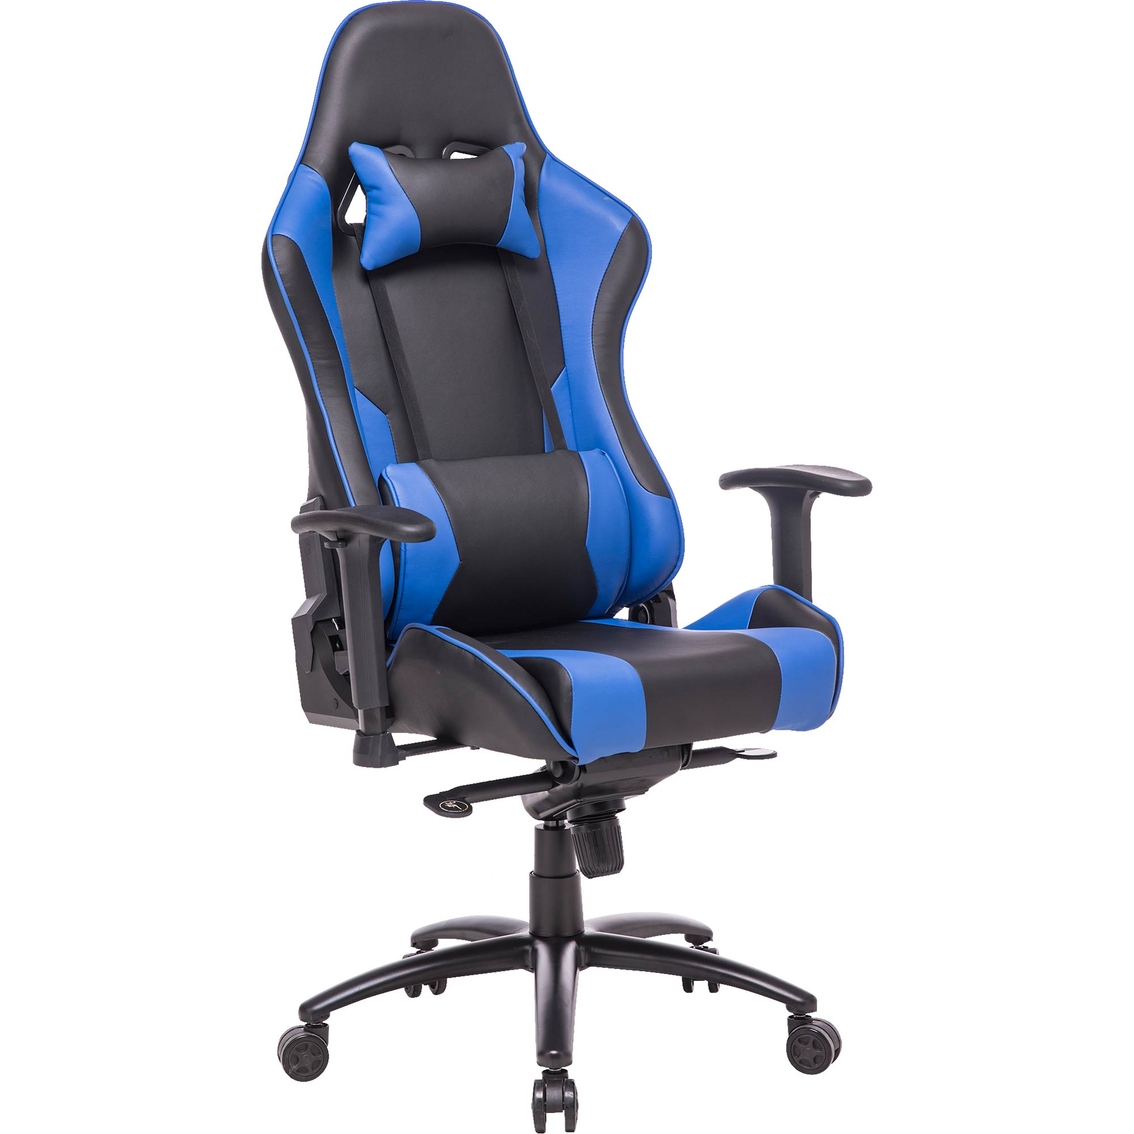 Playstation Gaming Chair With Foot Rest (Blue)